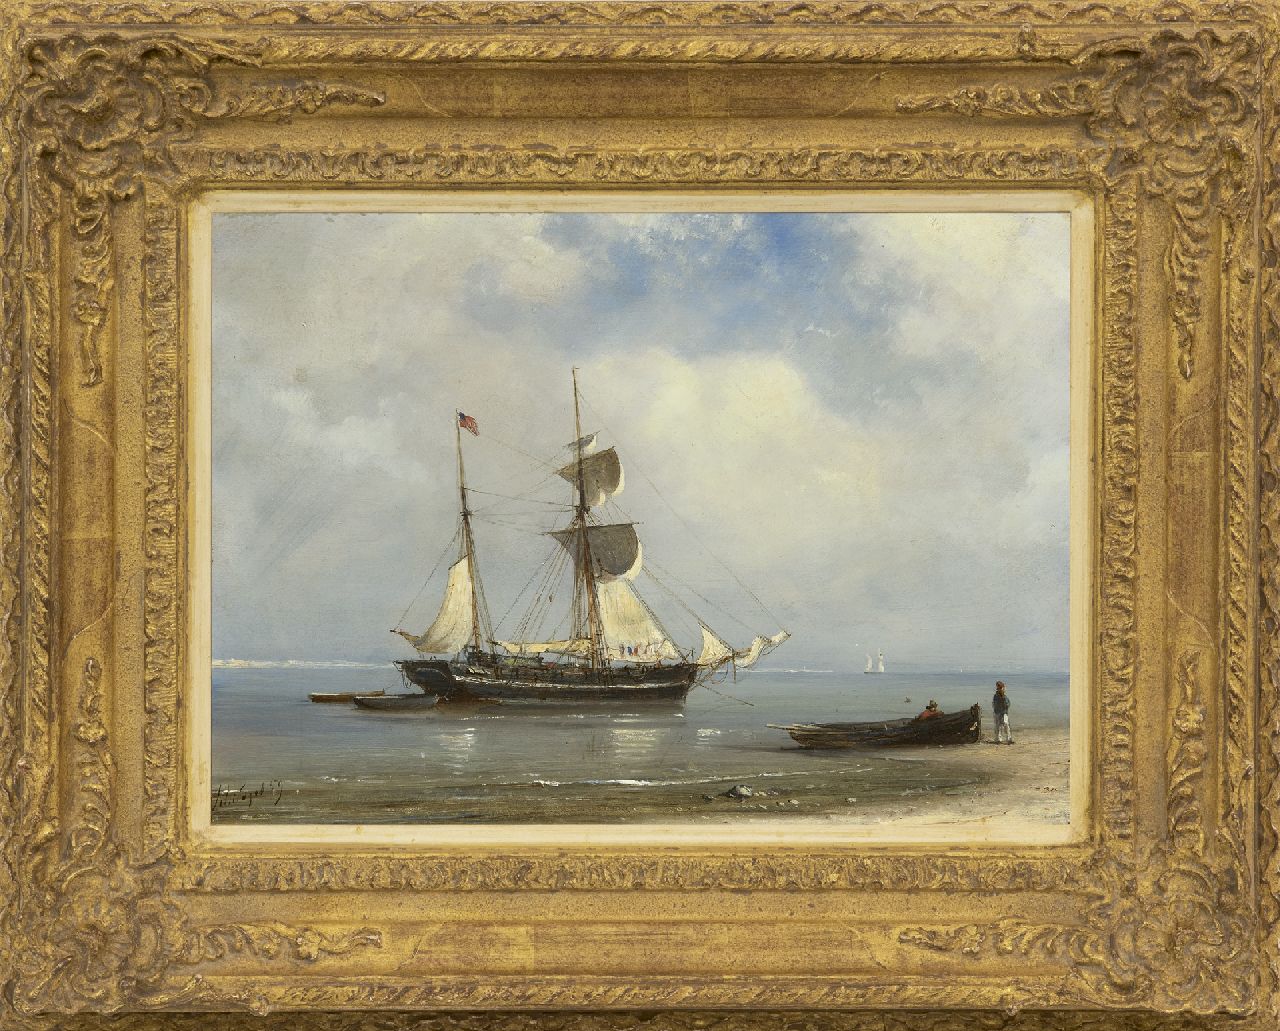 Schiedges P.P.  | Petrus Paulus Schiedges | Paintings offered for sale | A sailing ship achored in a calm sea, oil on panel 24.6 x 34.1 cm, signed l.l. and dated '59